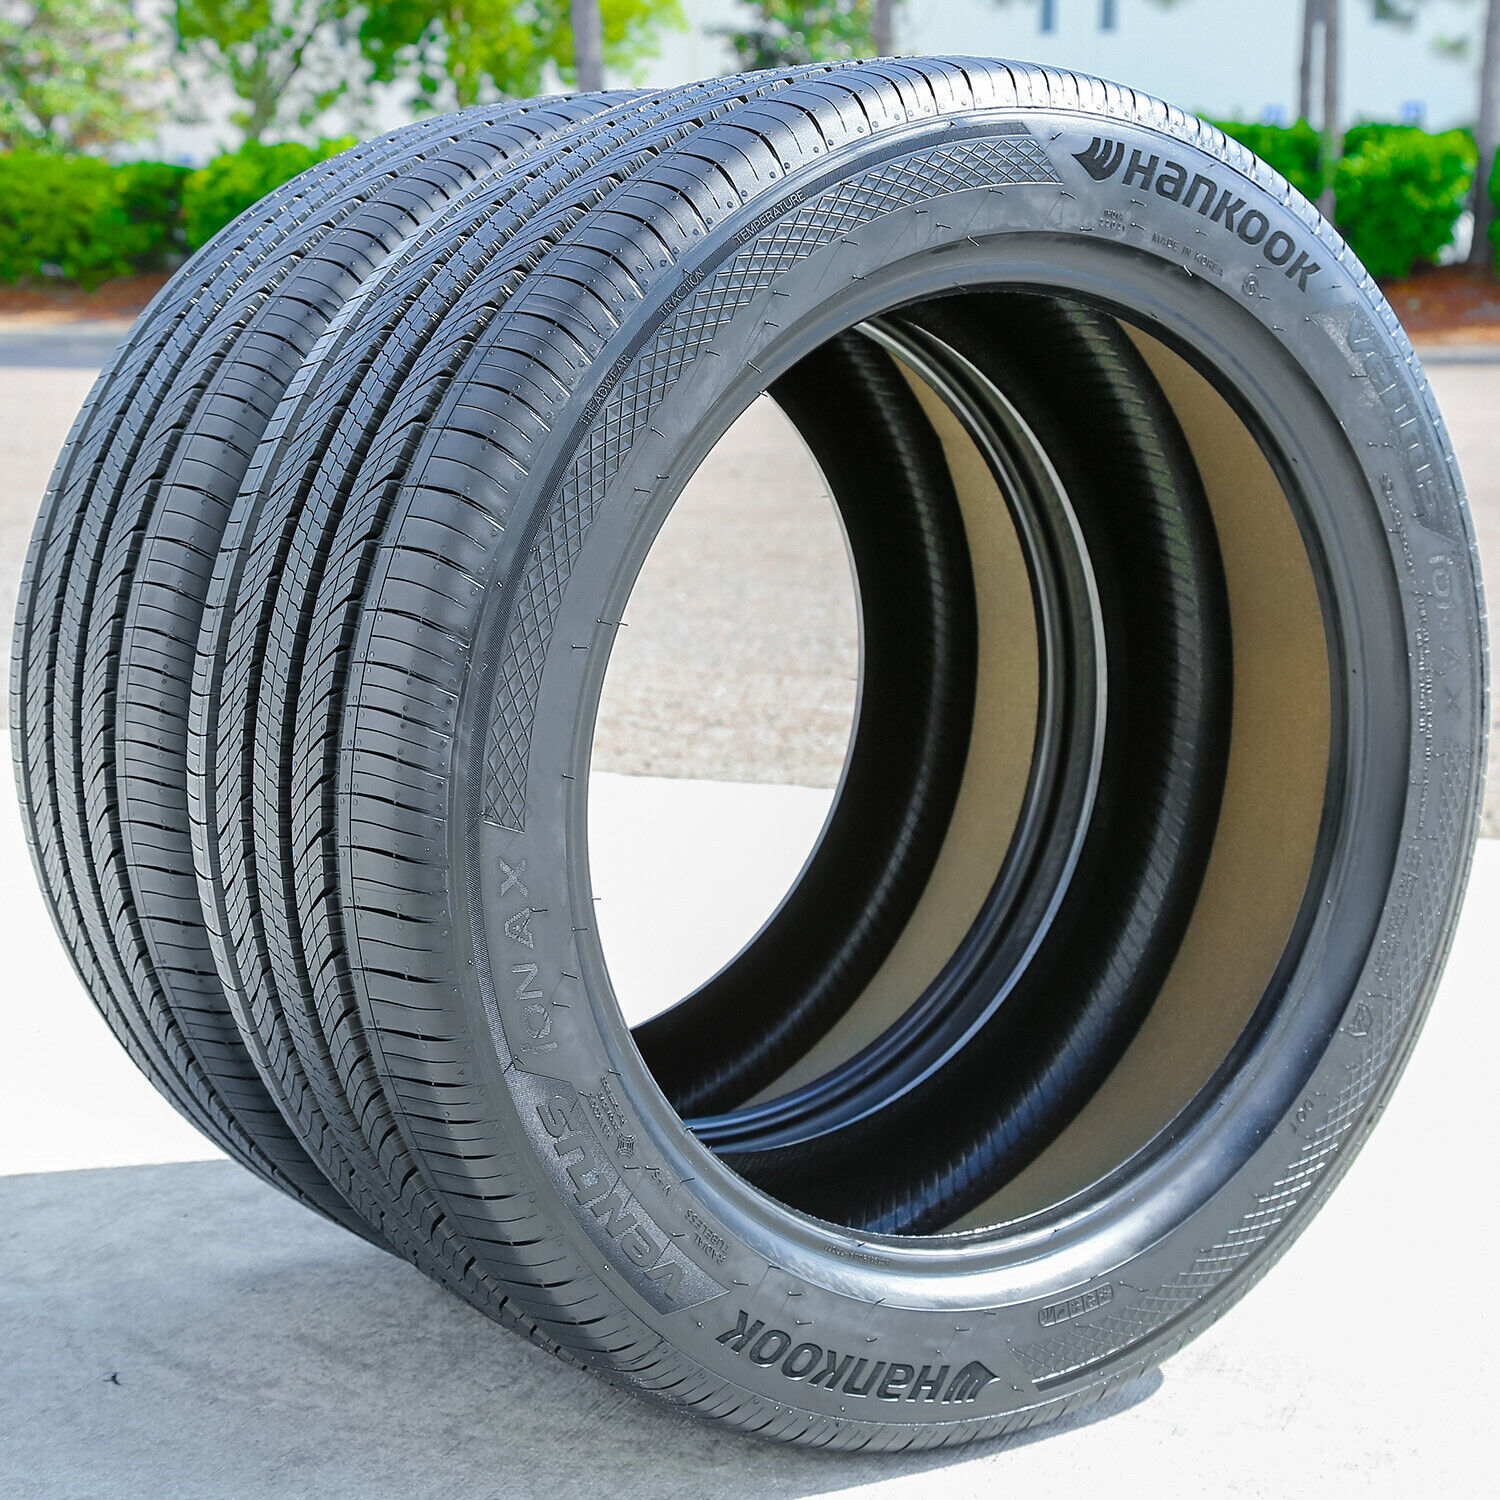 2 Tires 235/45R21 Hankook Ventus iON AX AS A/S High Performance 101Y XL